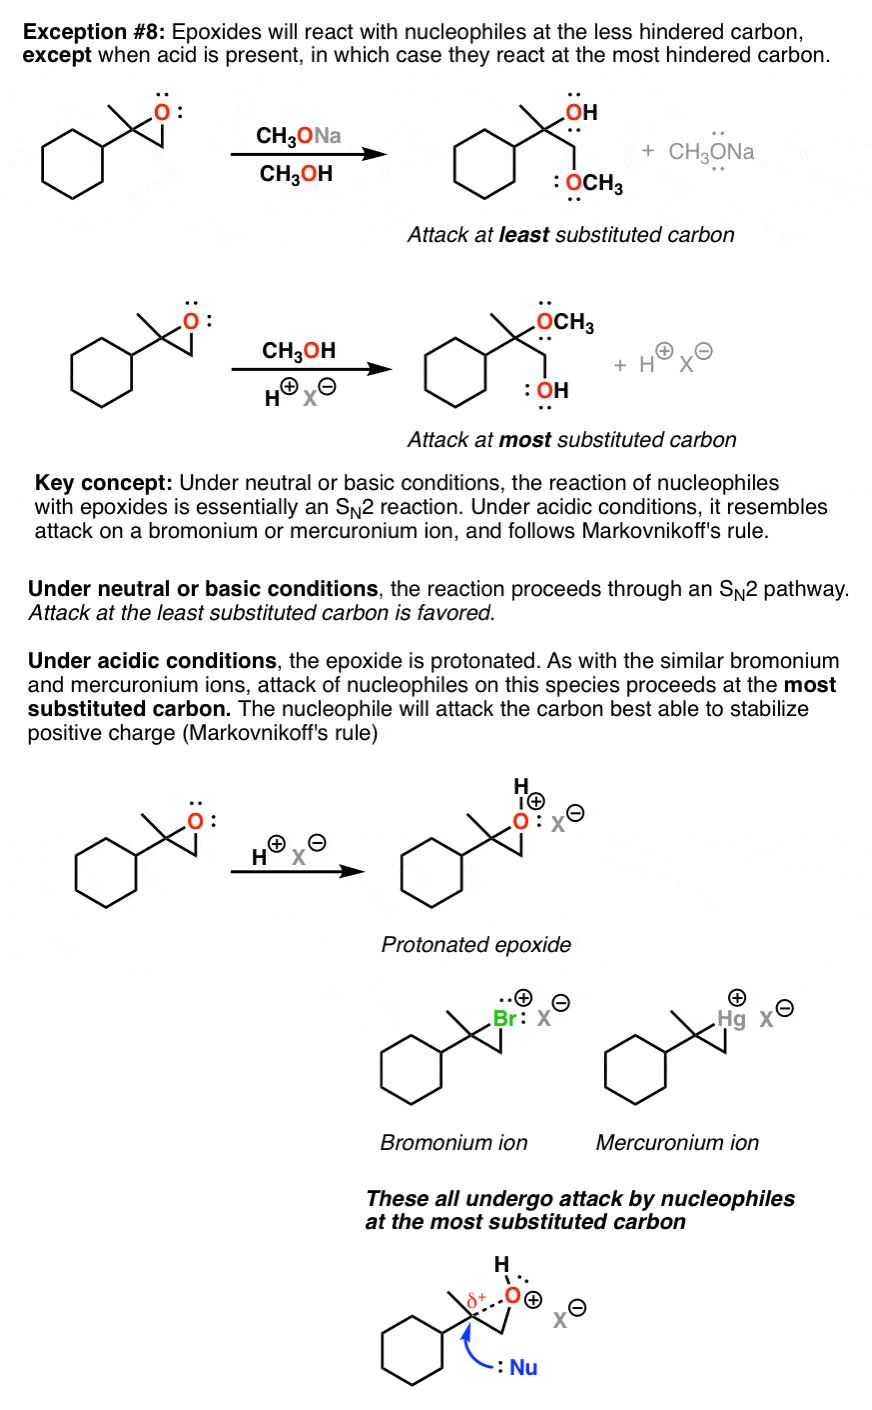 under-acidic-conditions-epoxides-react-at-most-substituted-site-under-basic-conditions-they-react-at-least-hindered-site